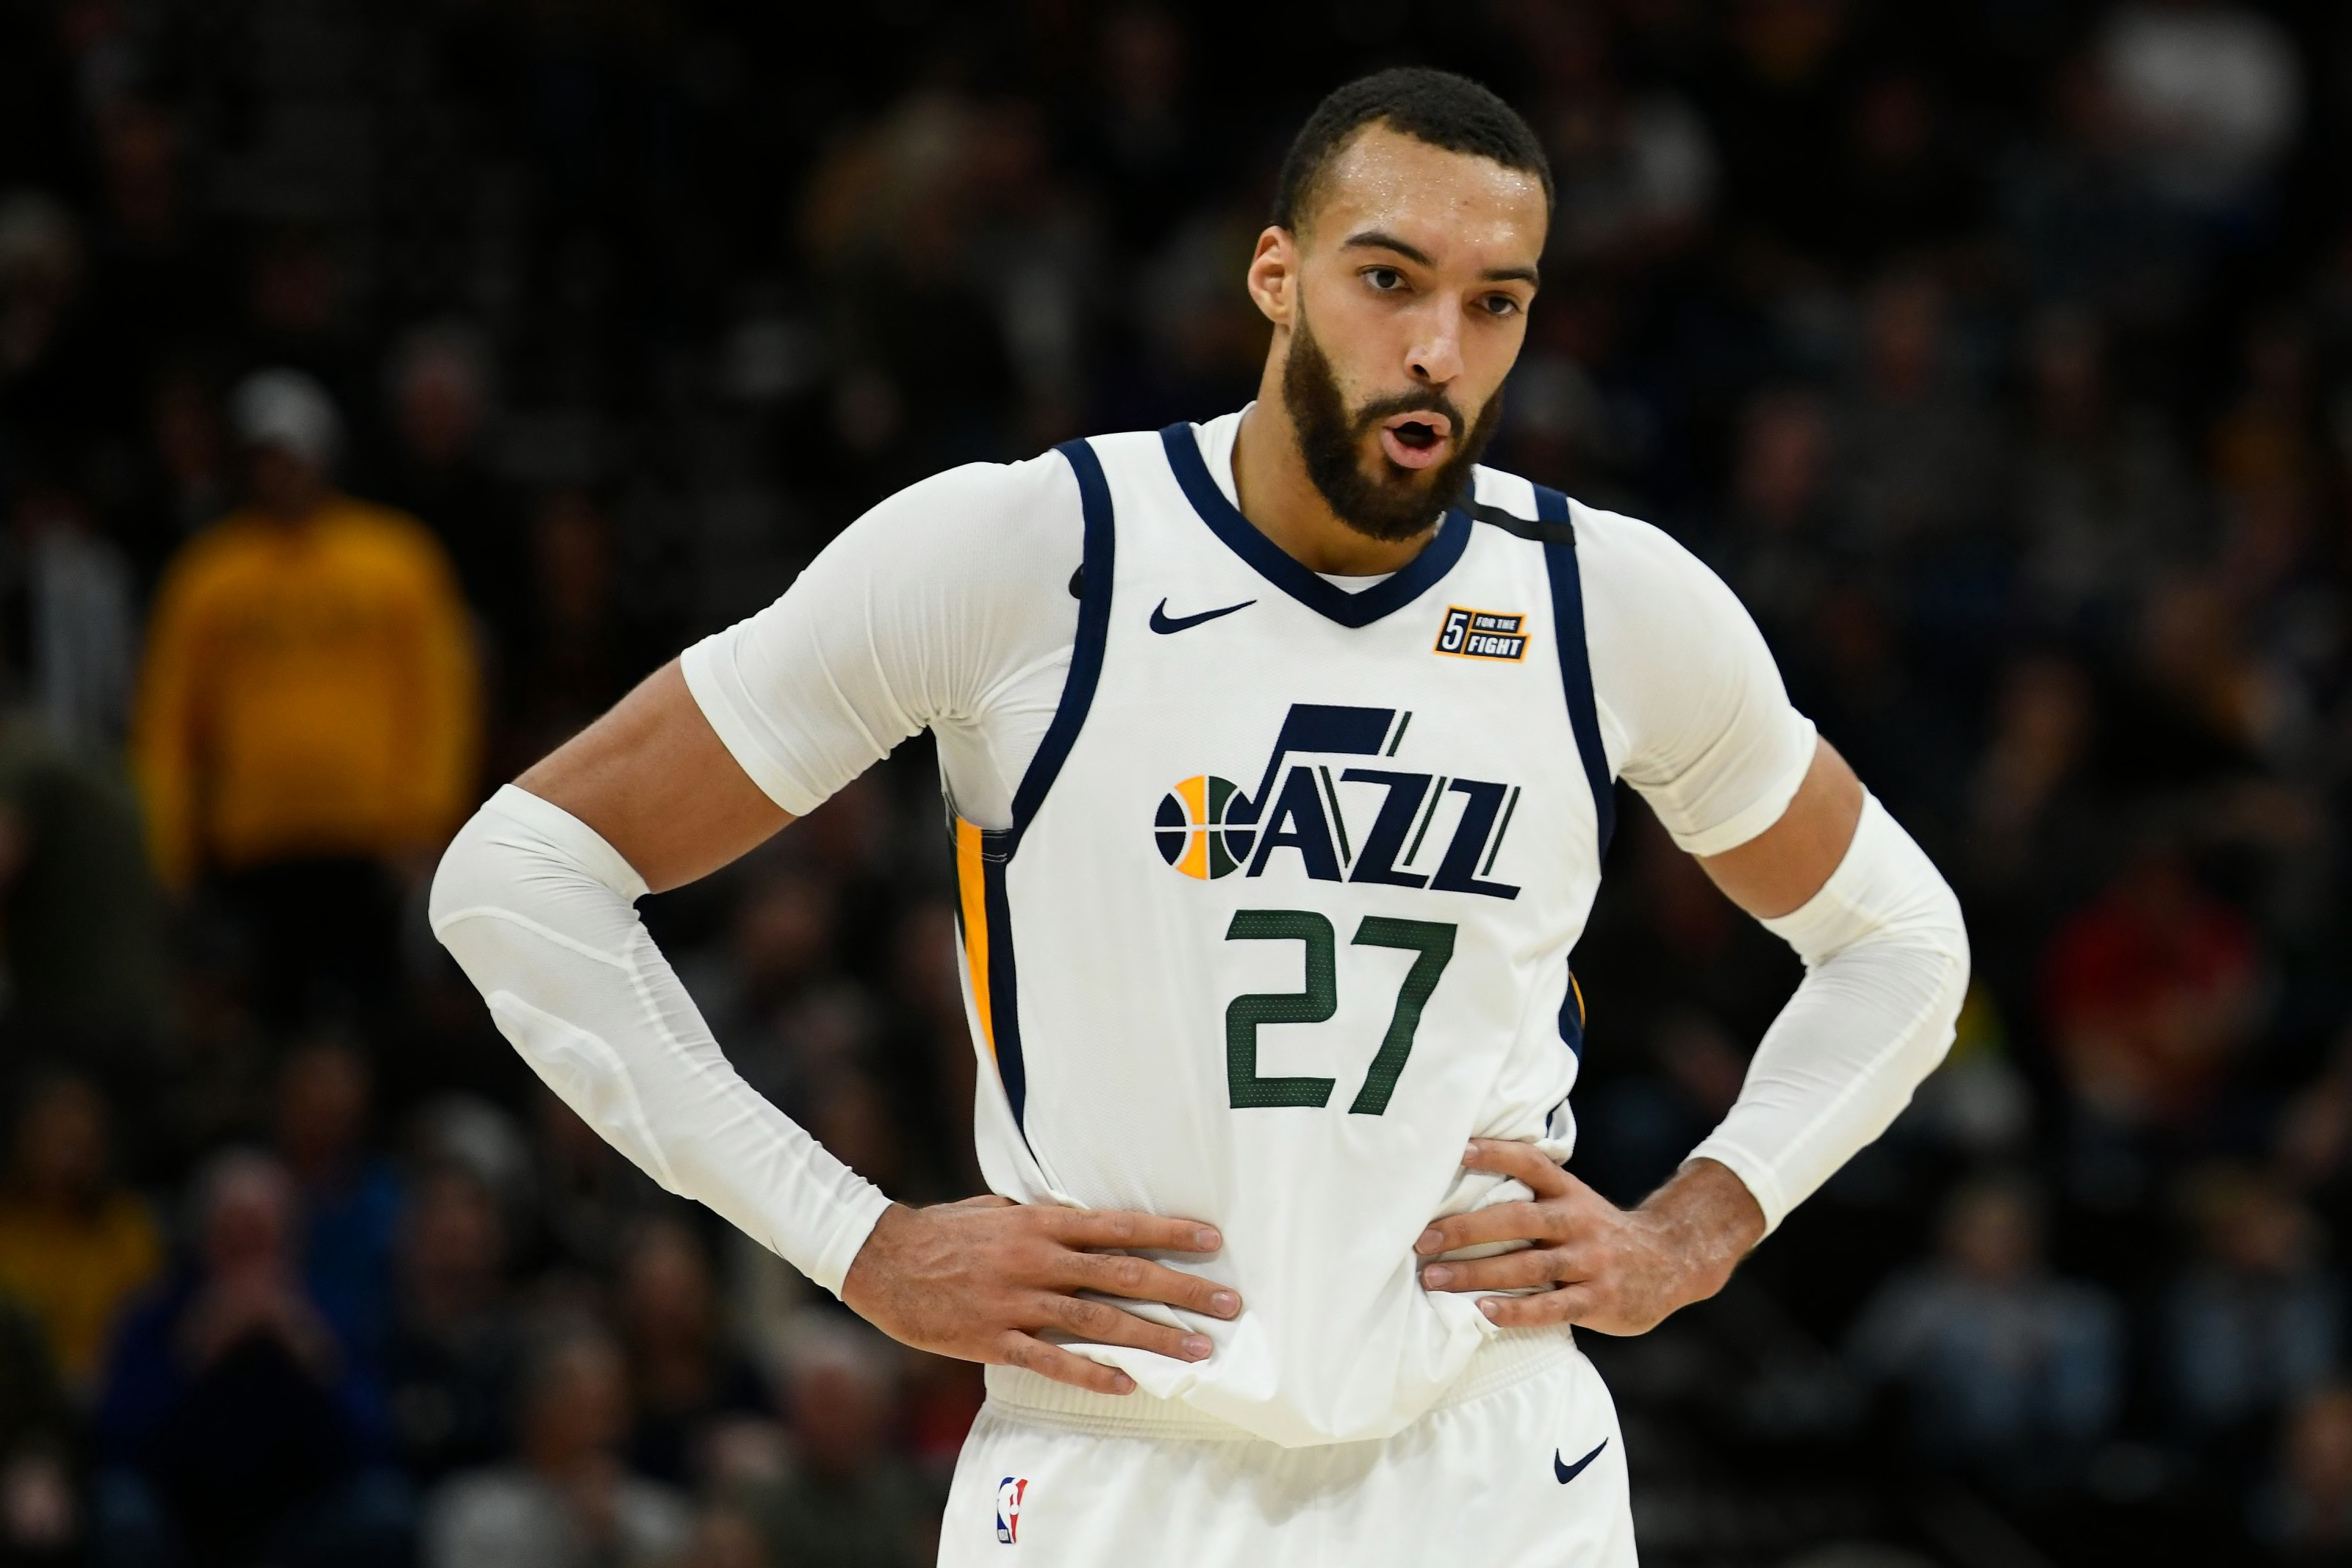 Utah Jazz 3 AllStar players that could be attainable in Rudy Gobert trade